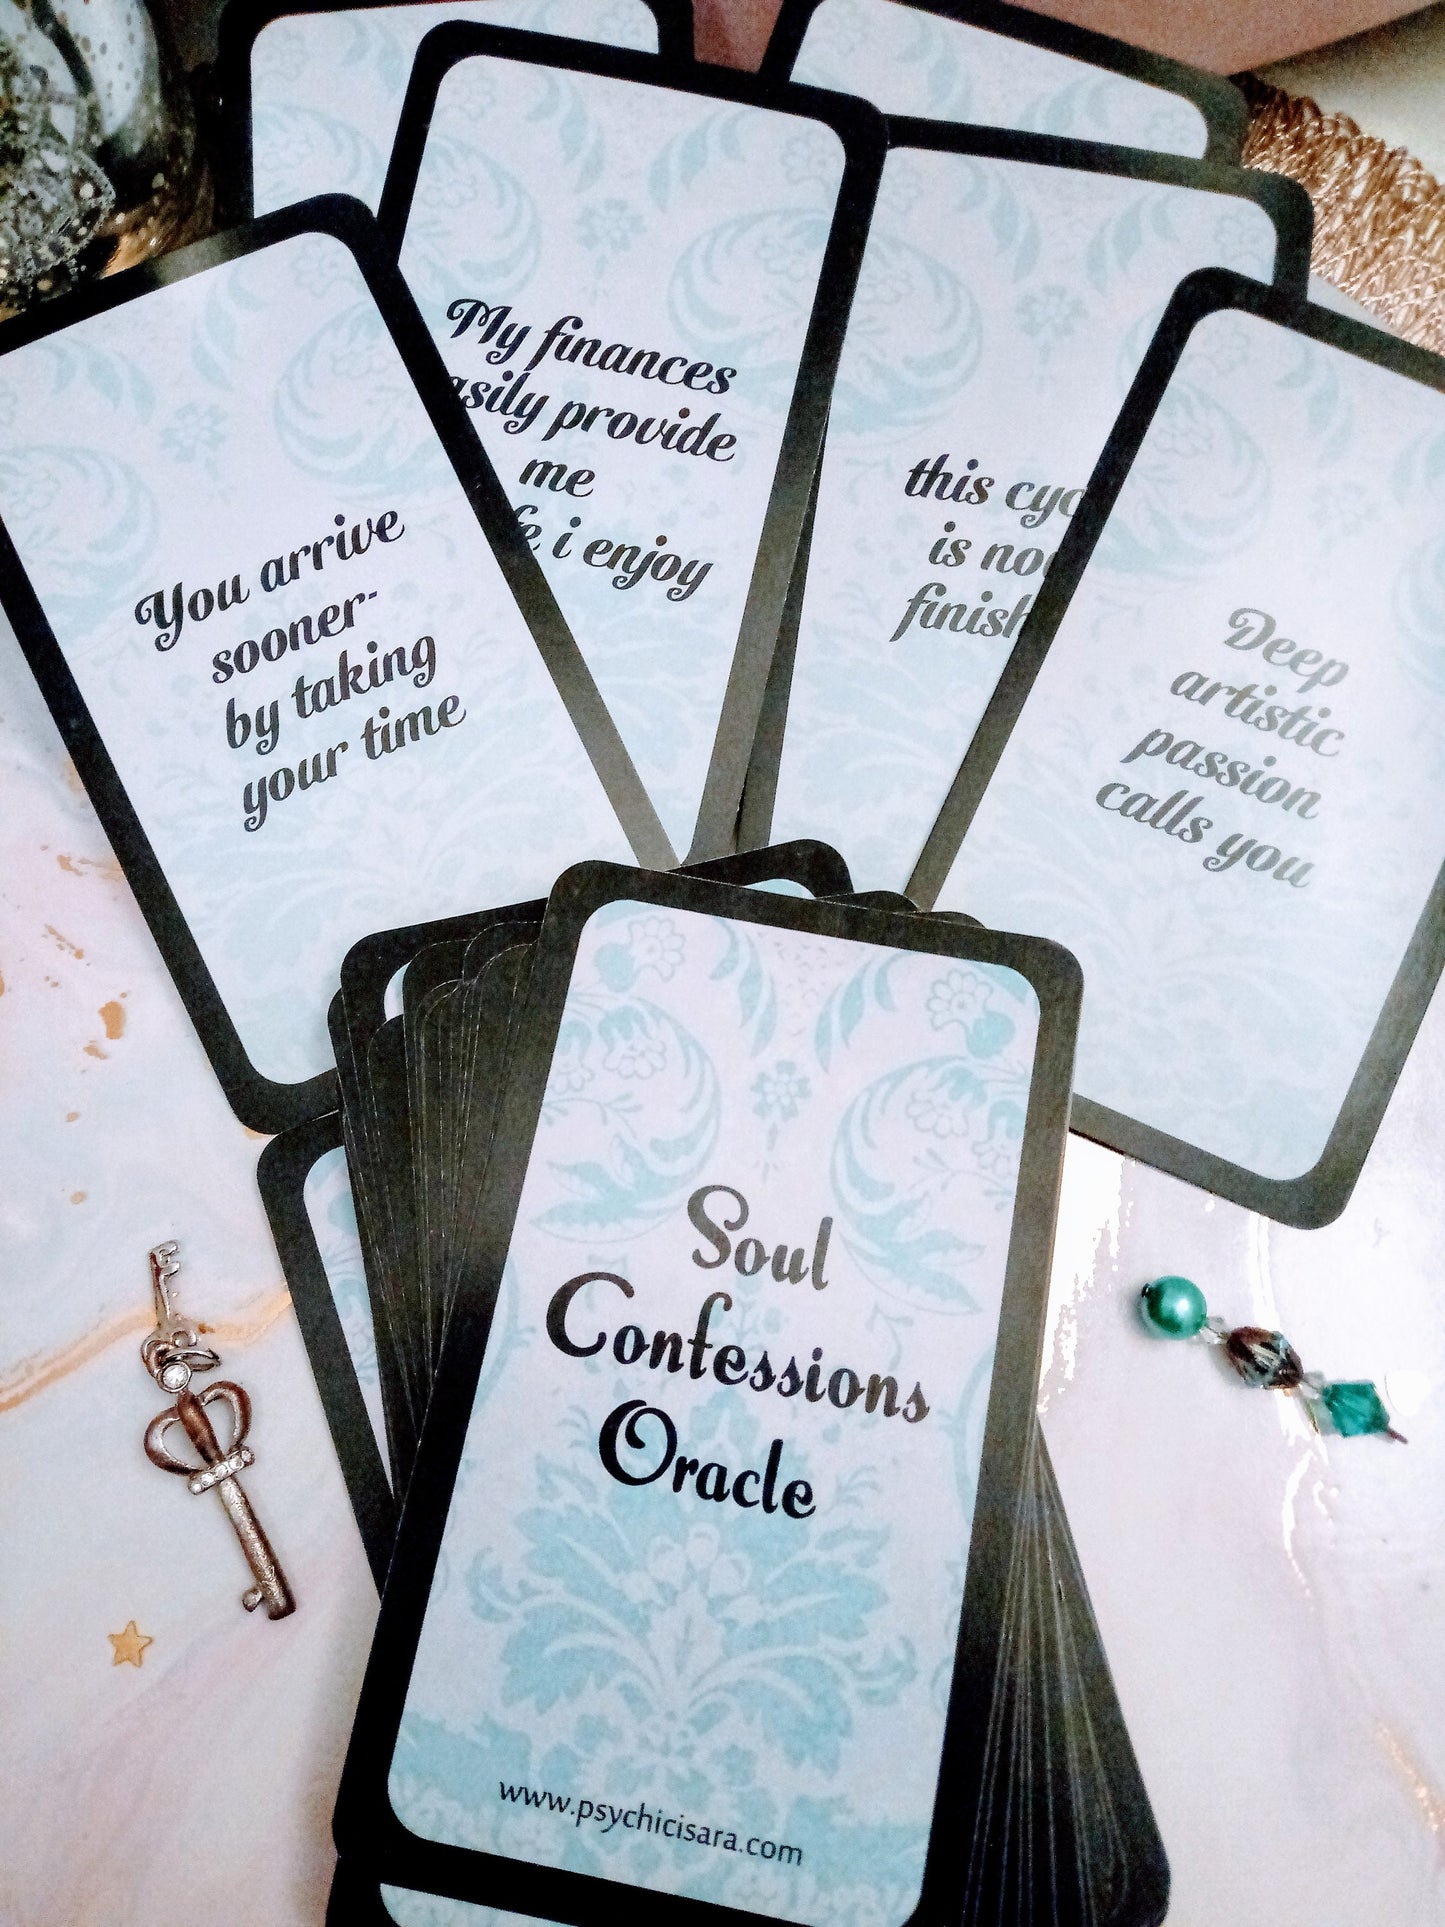 Soul Confessions - guidance from your higher self